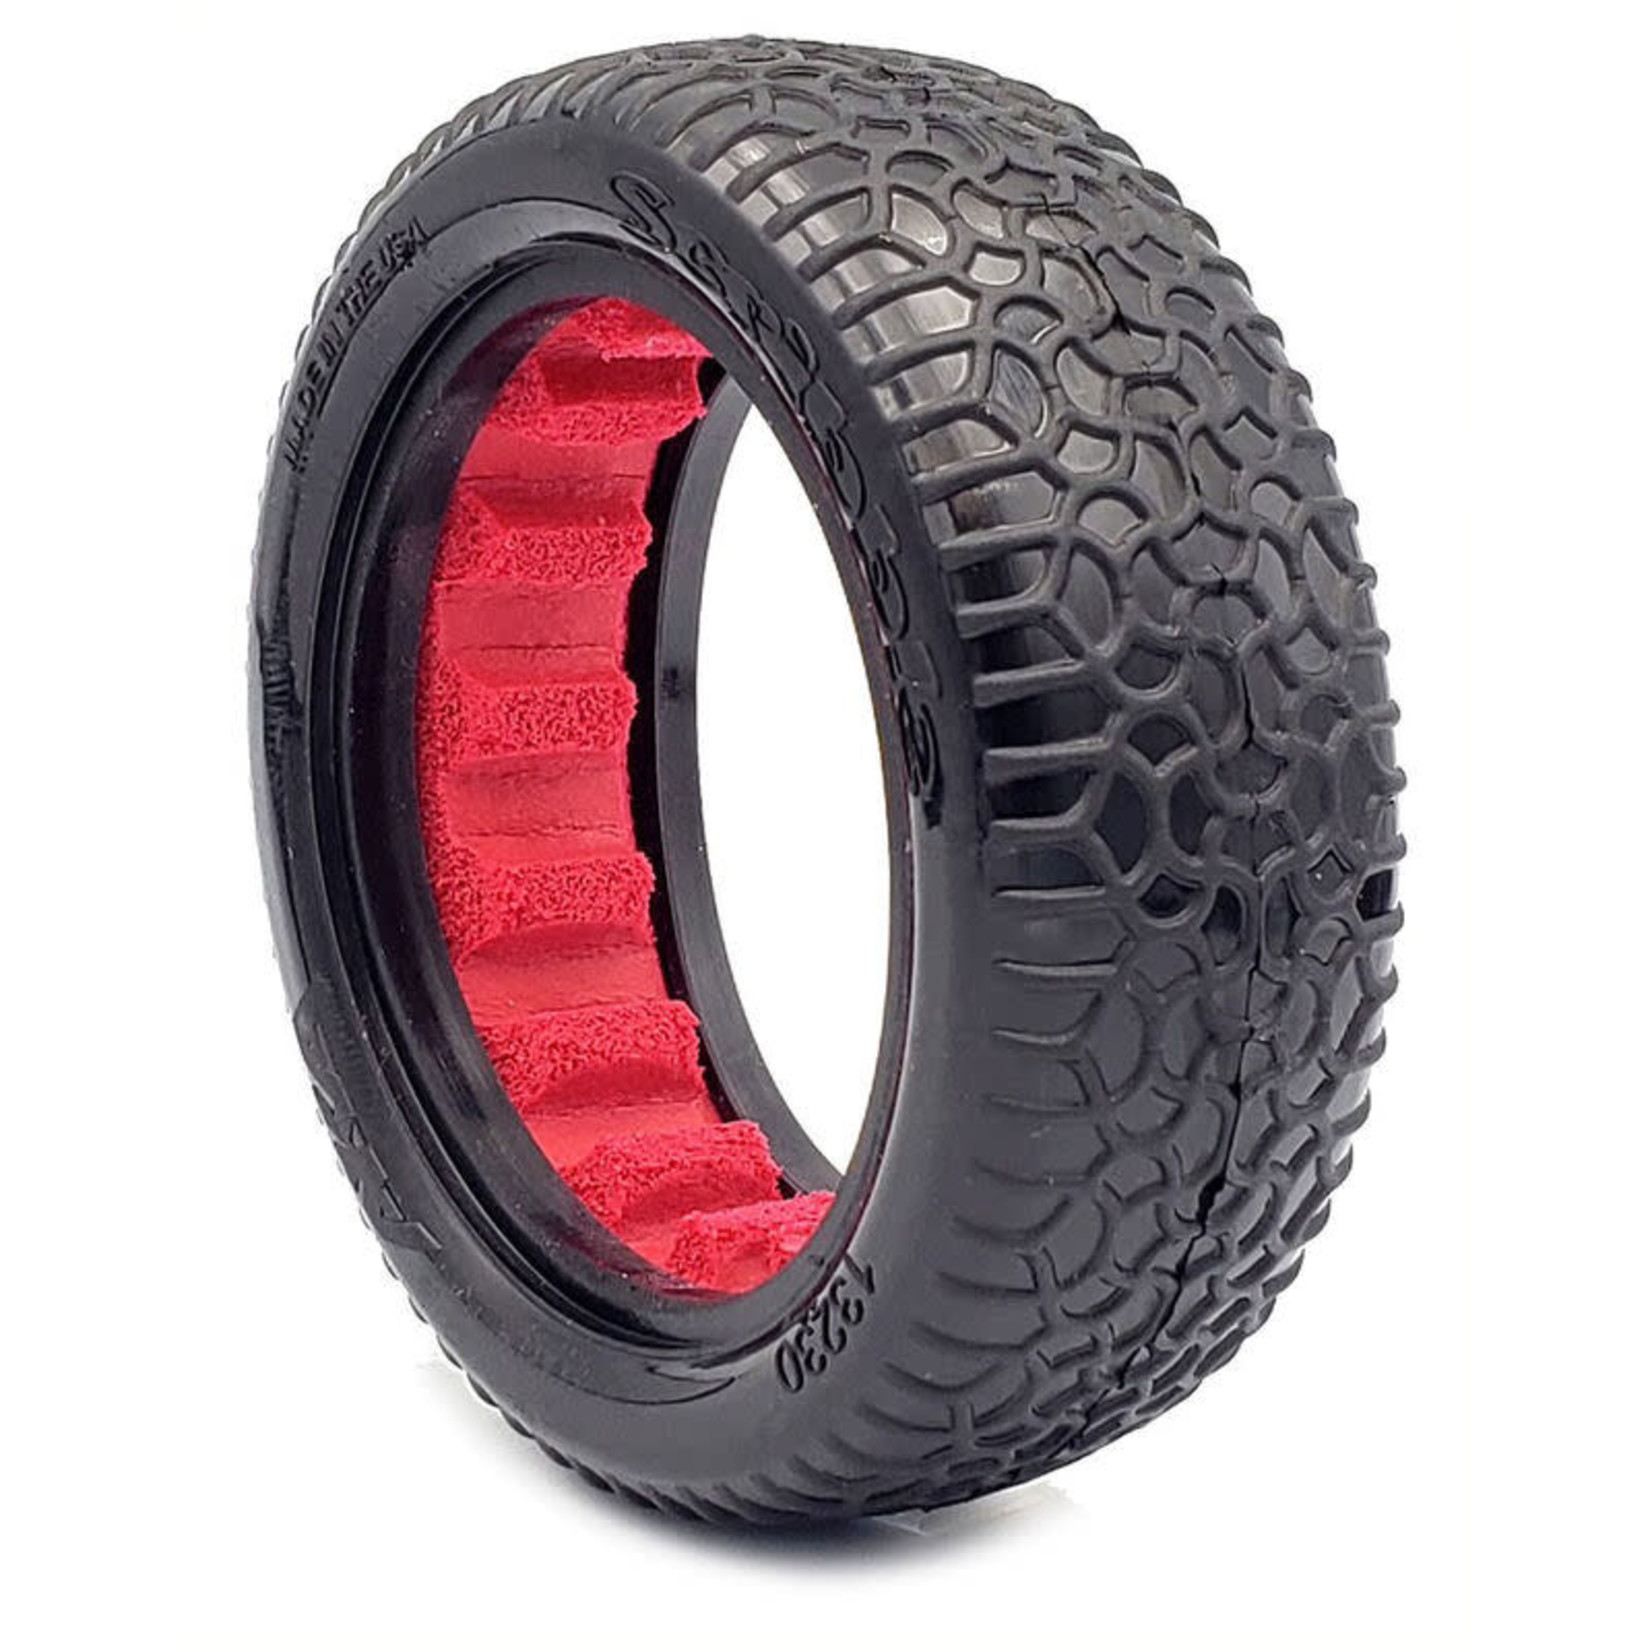 AKA **AKA13230CR AKA 1/10 Scribble Front 2WD 2.2 Tires, Clay with Red Inserts (2): Buggy